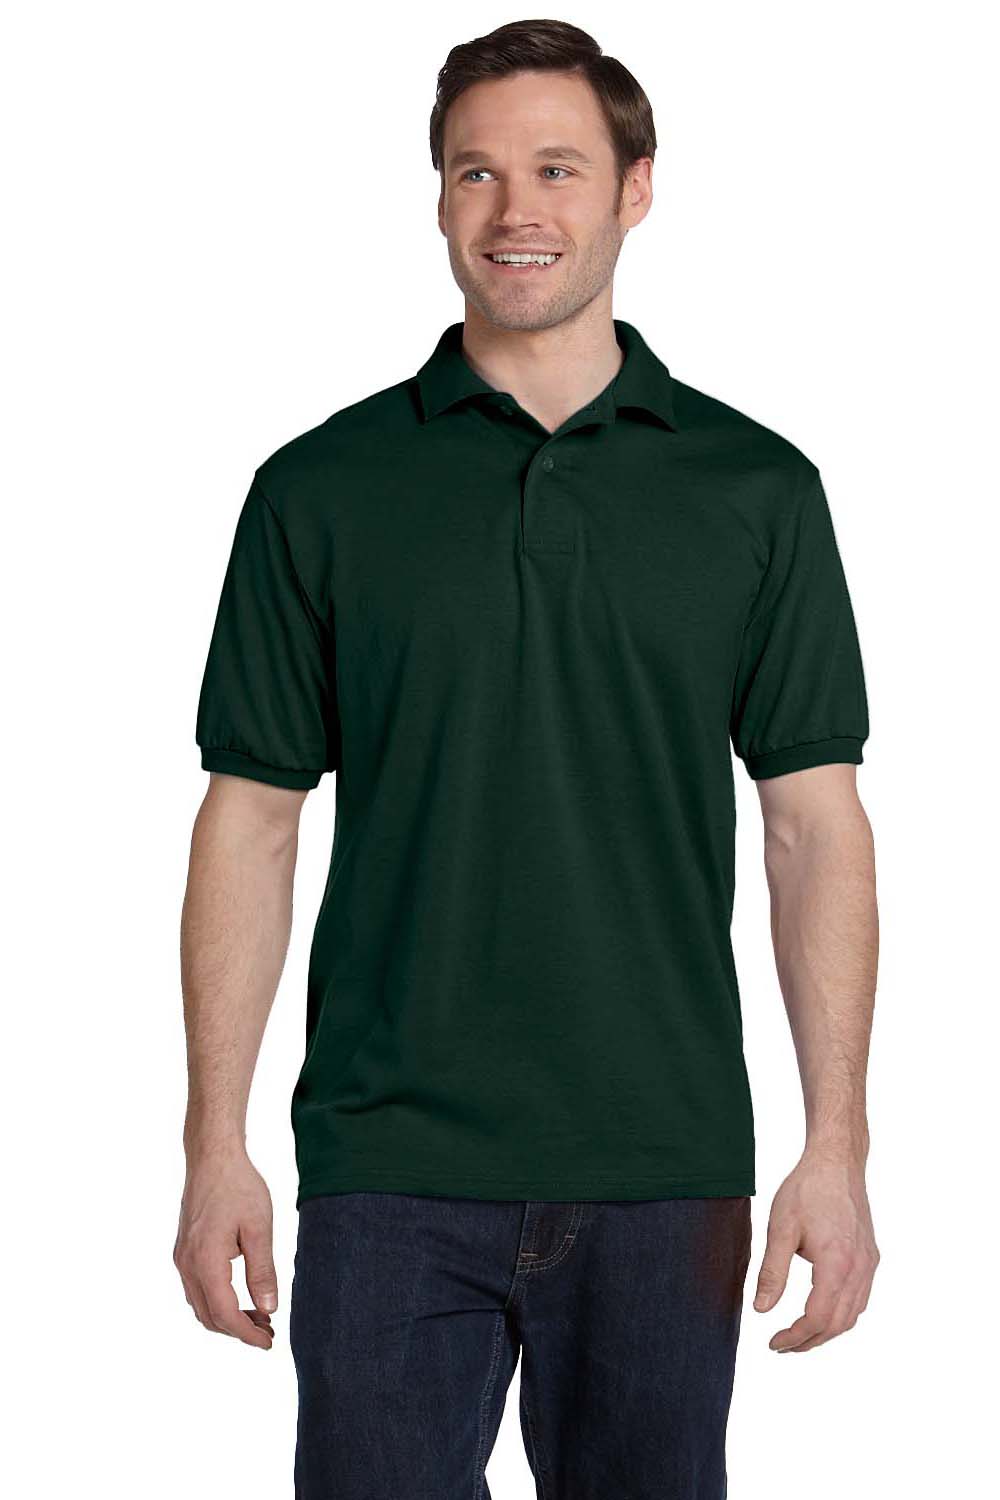 Hanes 054 Mens EcoSmart Short Sleeve Polo Shirt Forest Green Front